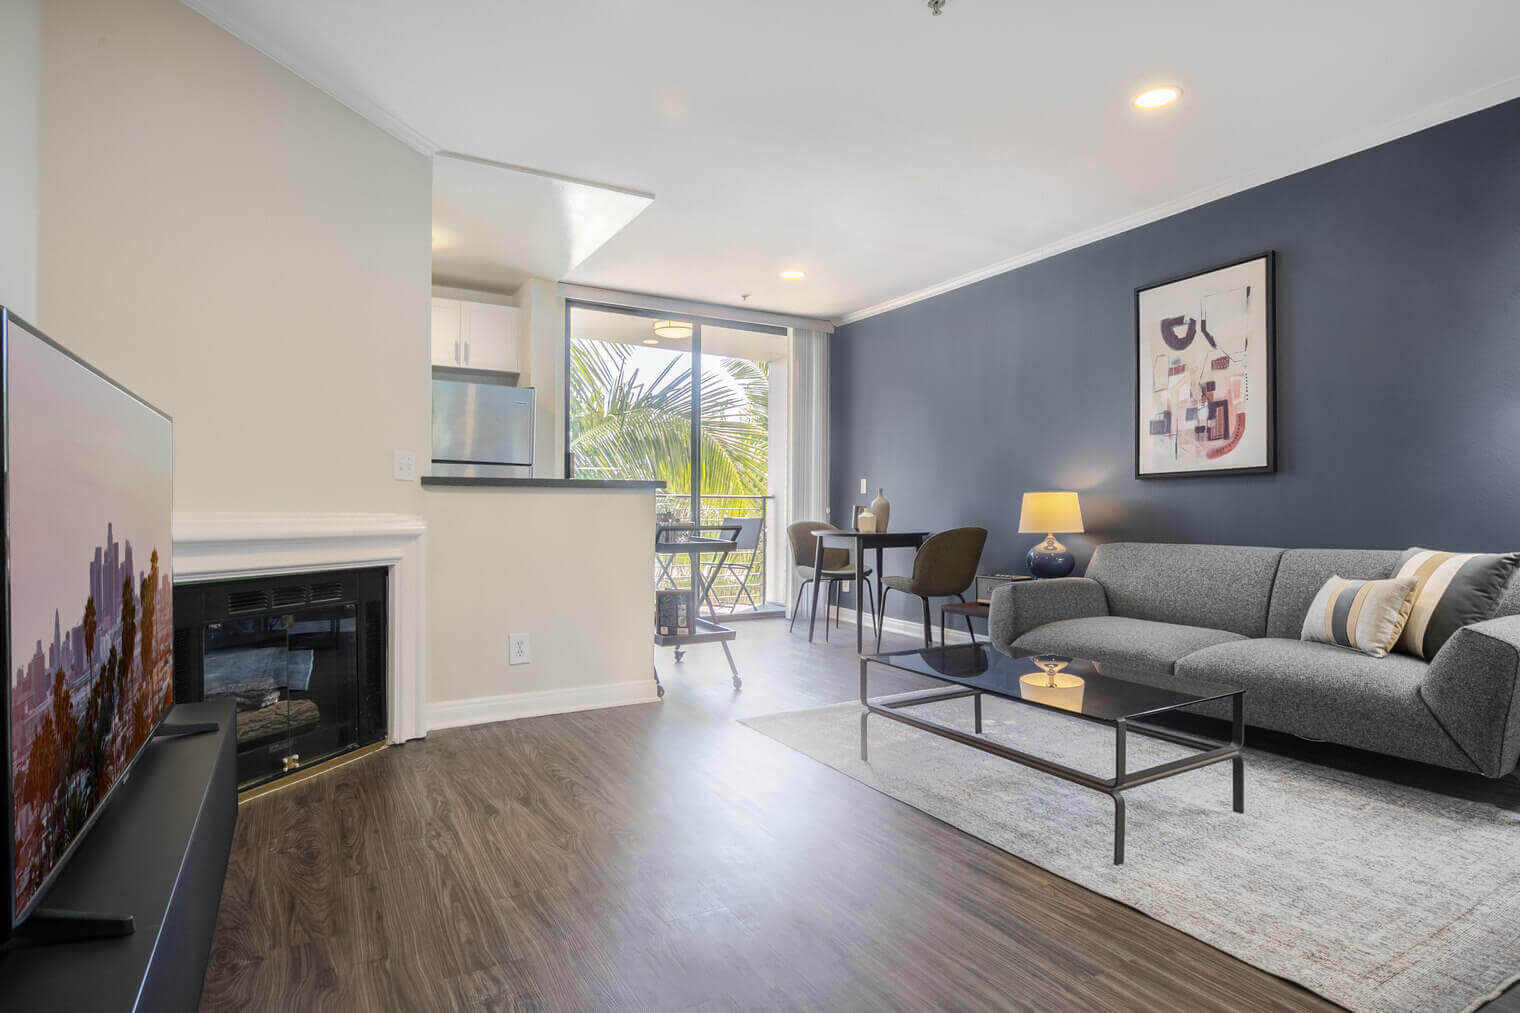 A furnished apartment in Brentwood Los Angeles. There is a fireplace next to a large TV on a large black TV stand across from a grey couch and a marble coffee table. In the back of the room there is a large window with a palm tree outside.